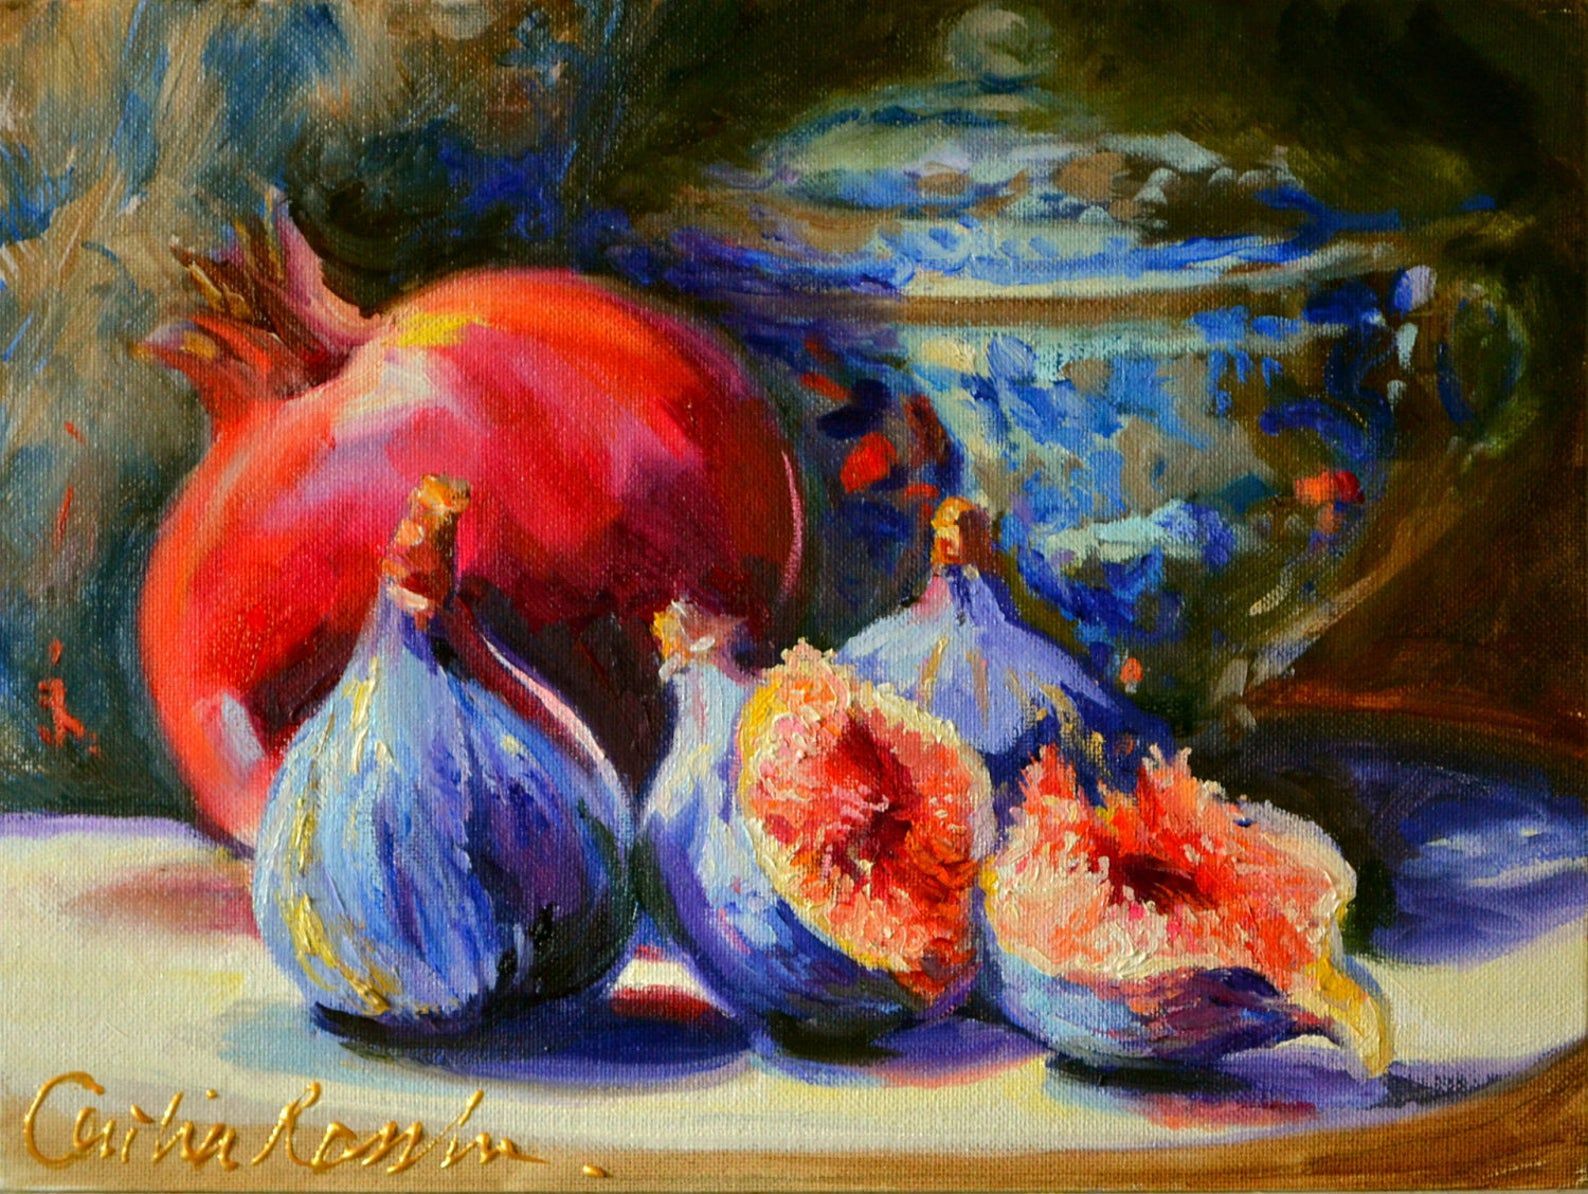 Still Life ART Print of DRIE VYTJIES art print | Painting of Figs by Cecilia Rosslee | Beautiful artwork for kitchen -   17 beauty Life painting ideas